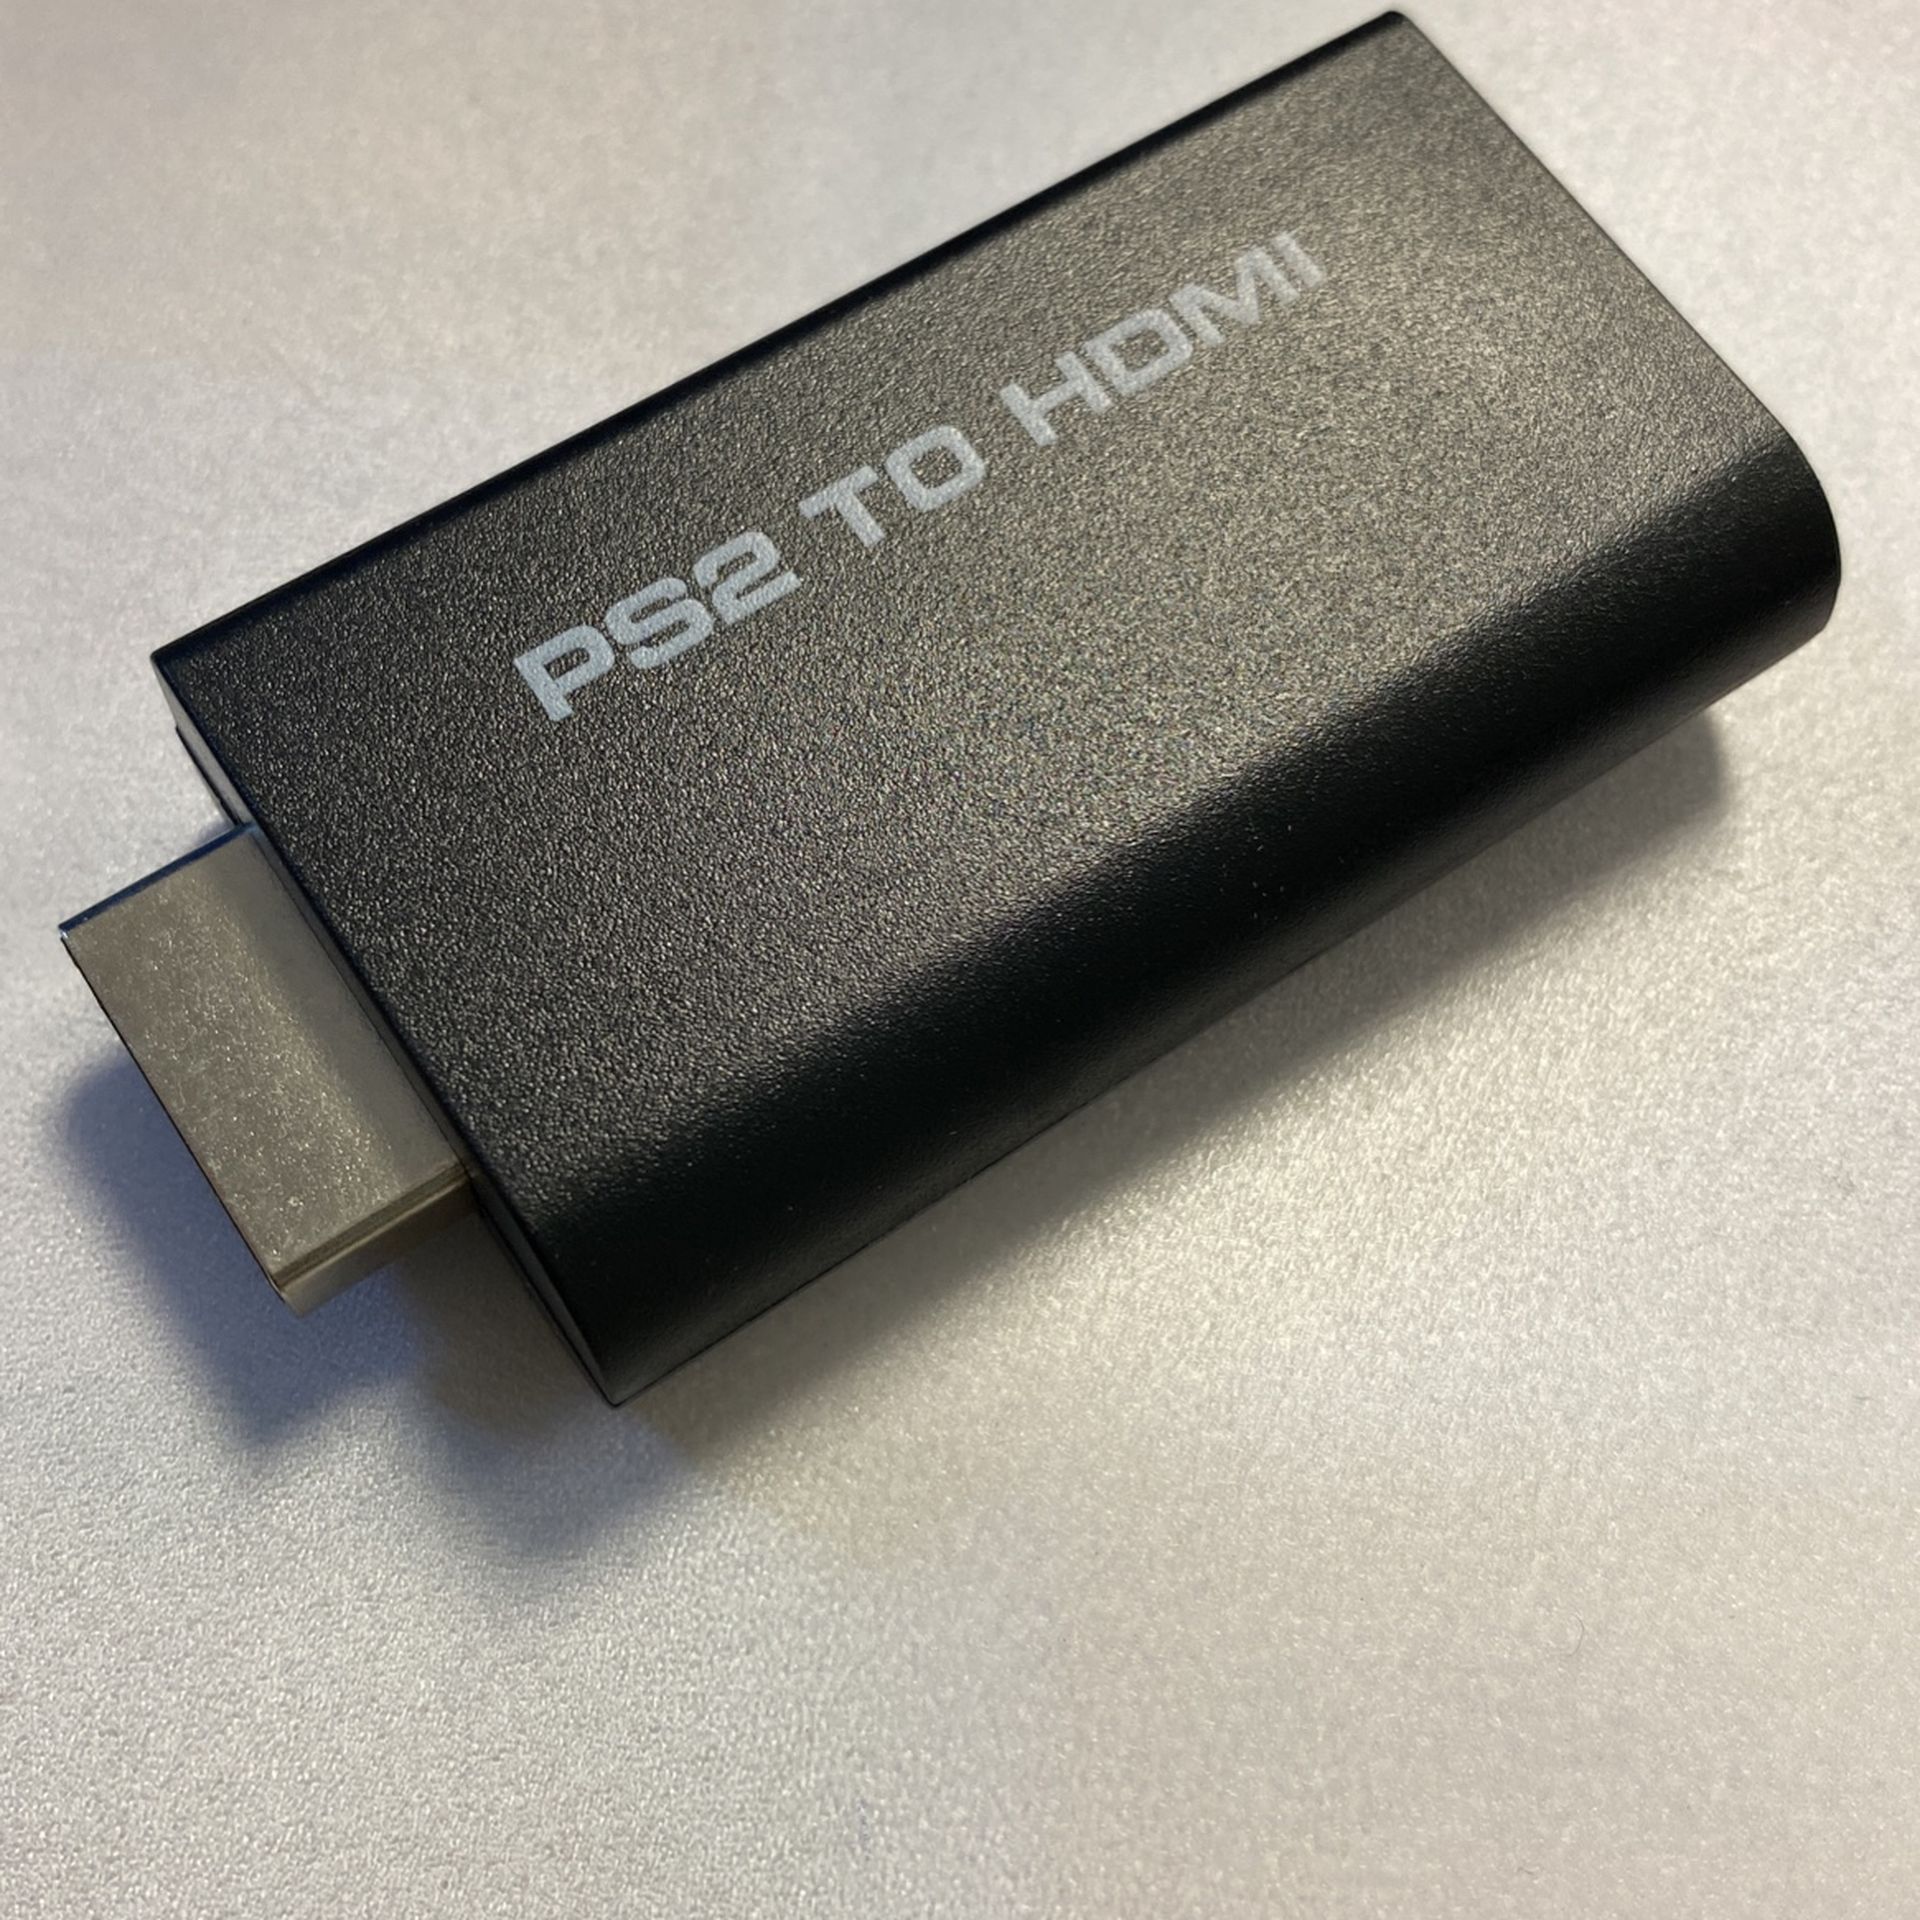 Ps2 To HDMI Adaptor